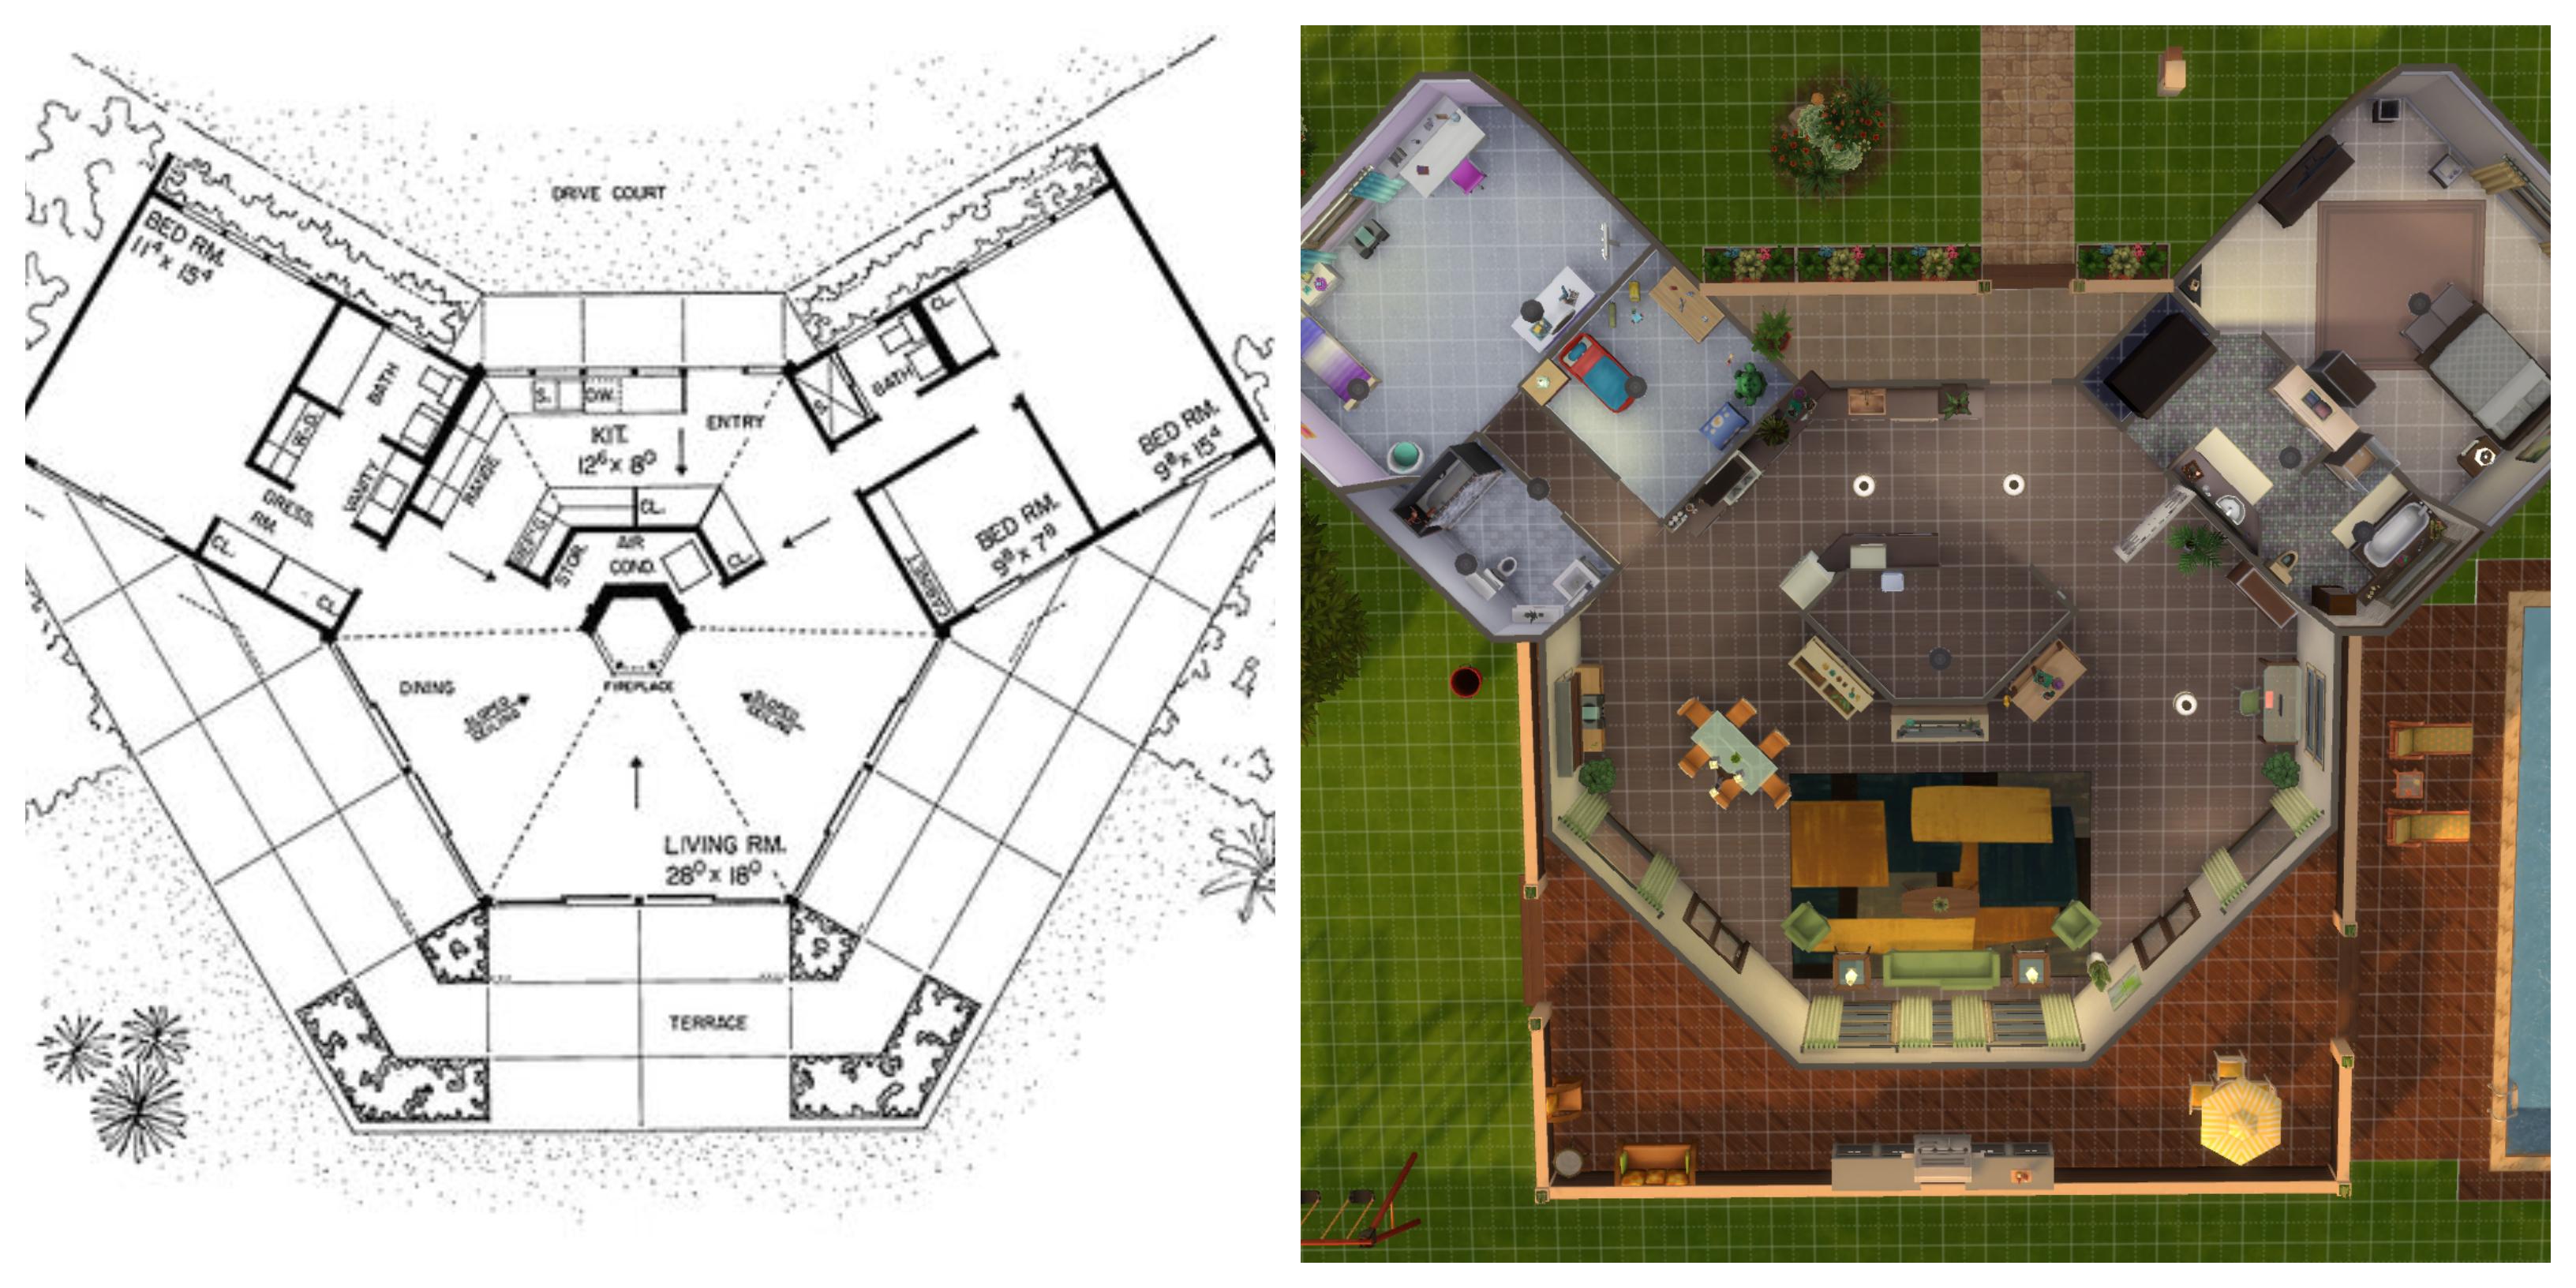 I googled unique floor plans and tried this one. It's not